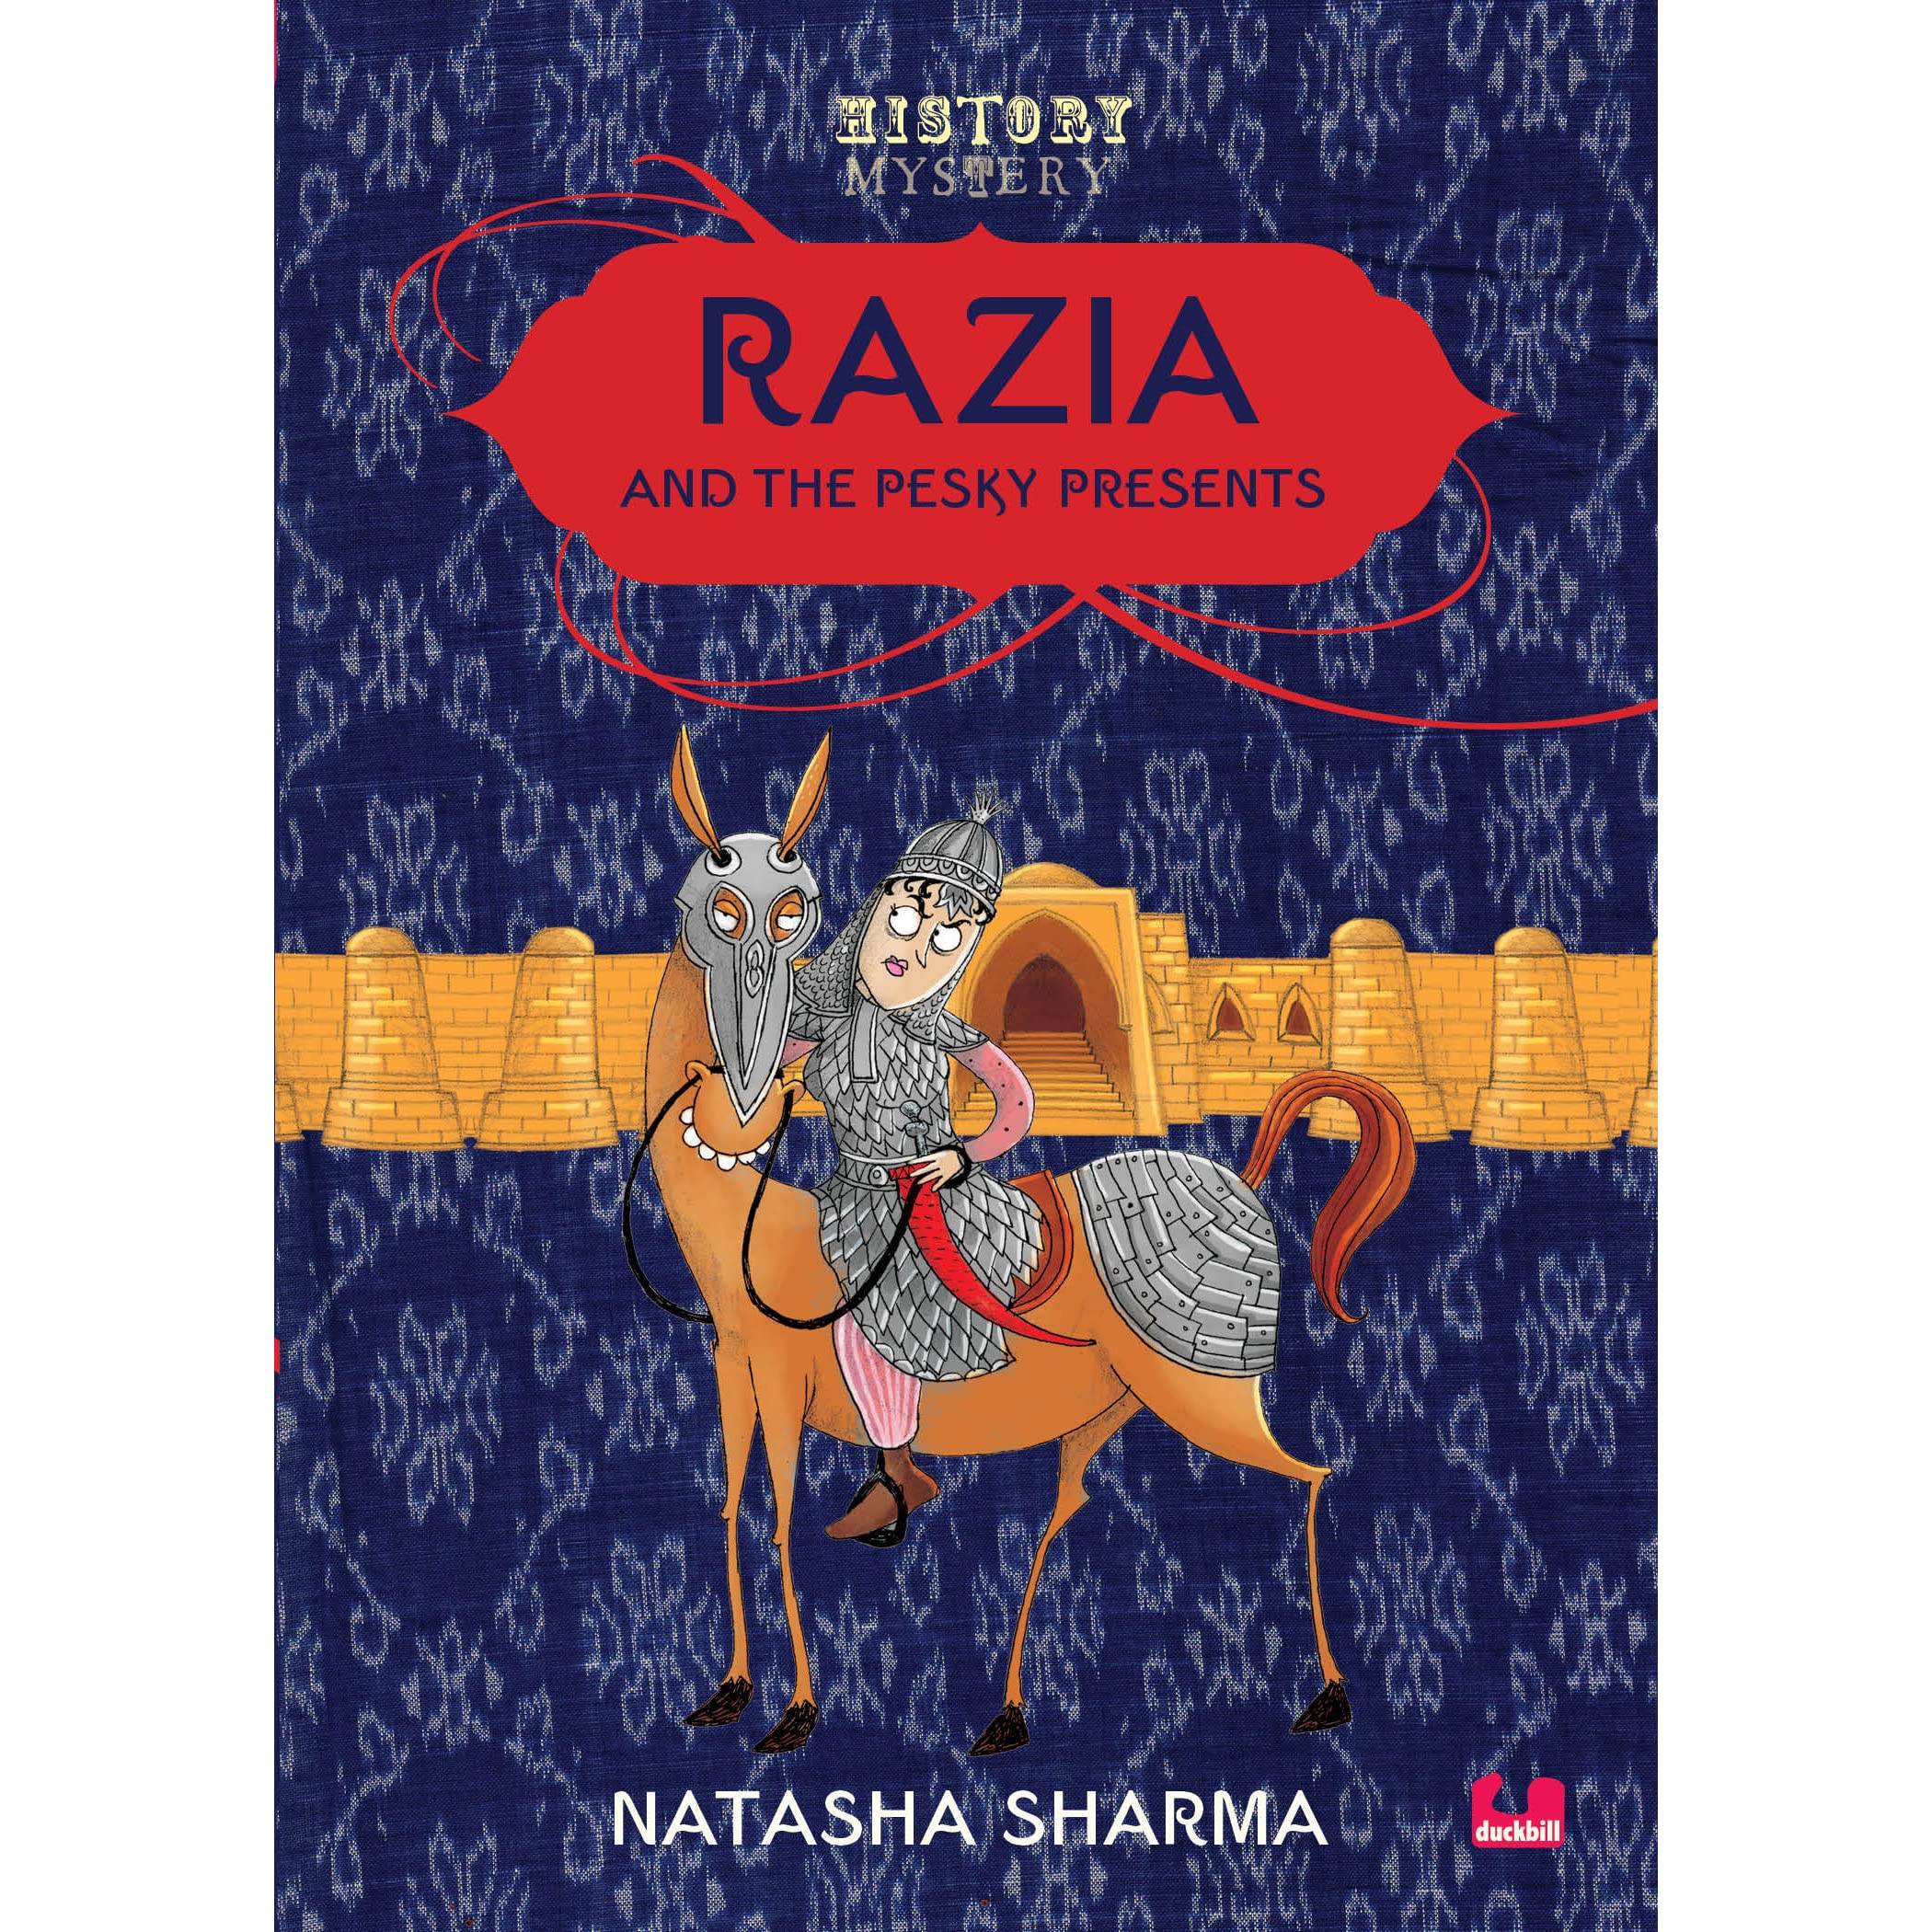 IMG : History Mystery Series- Razia and the Pesky presents